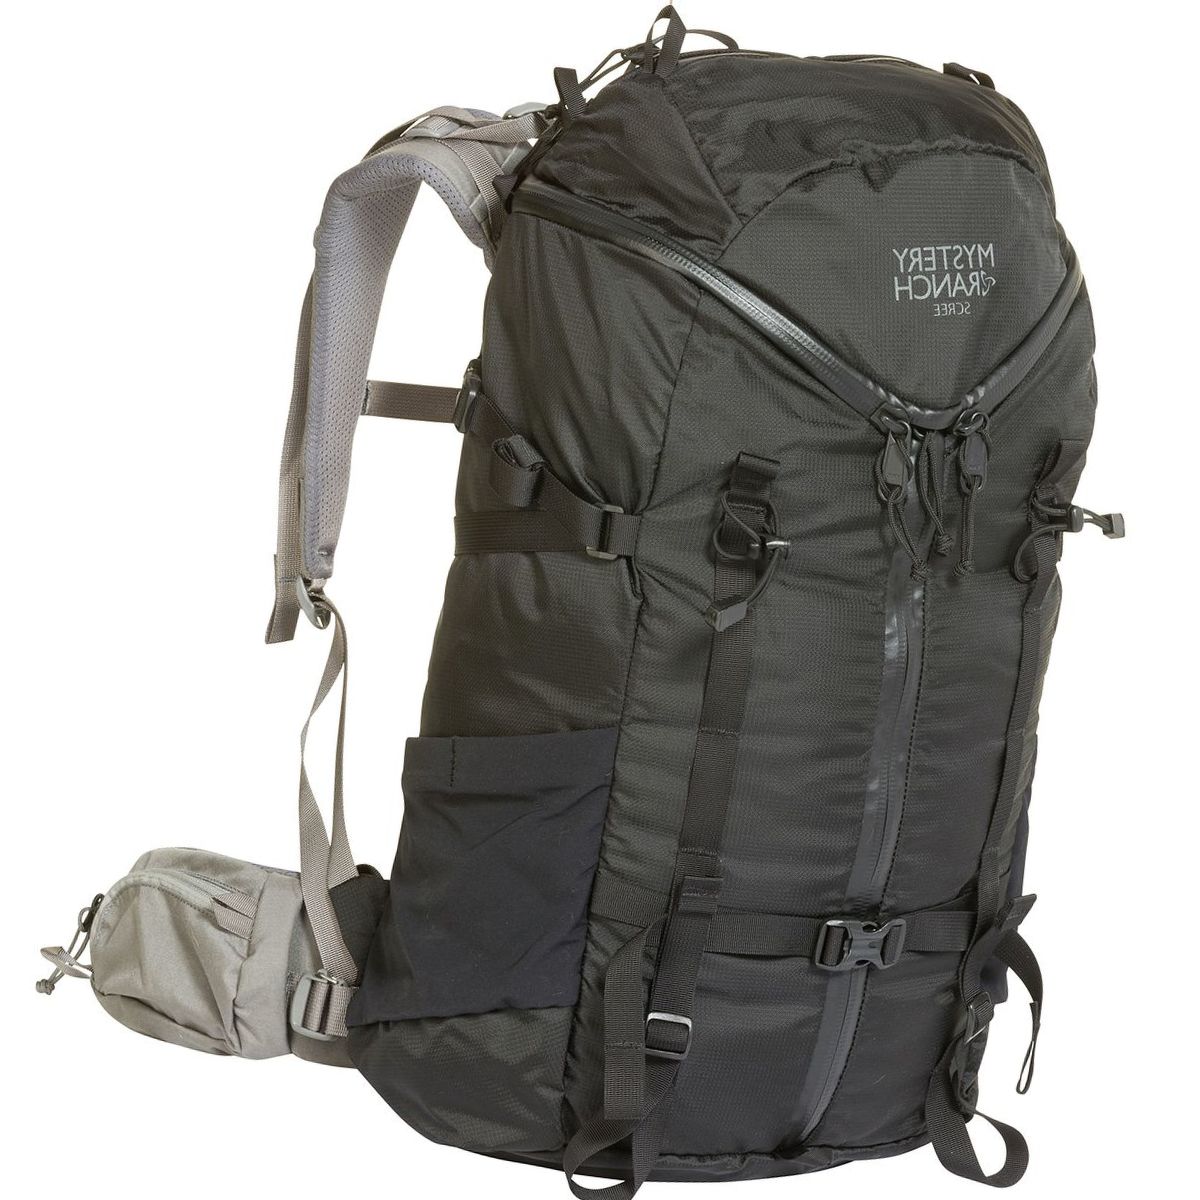 Mystery Ranch Scree 32L Backpack - Women's